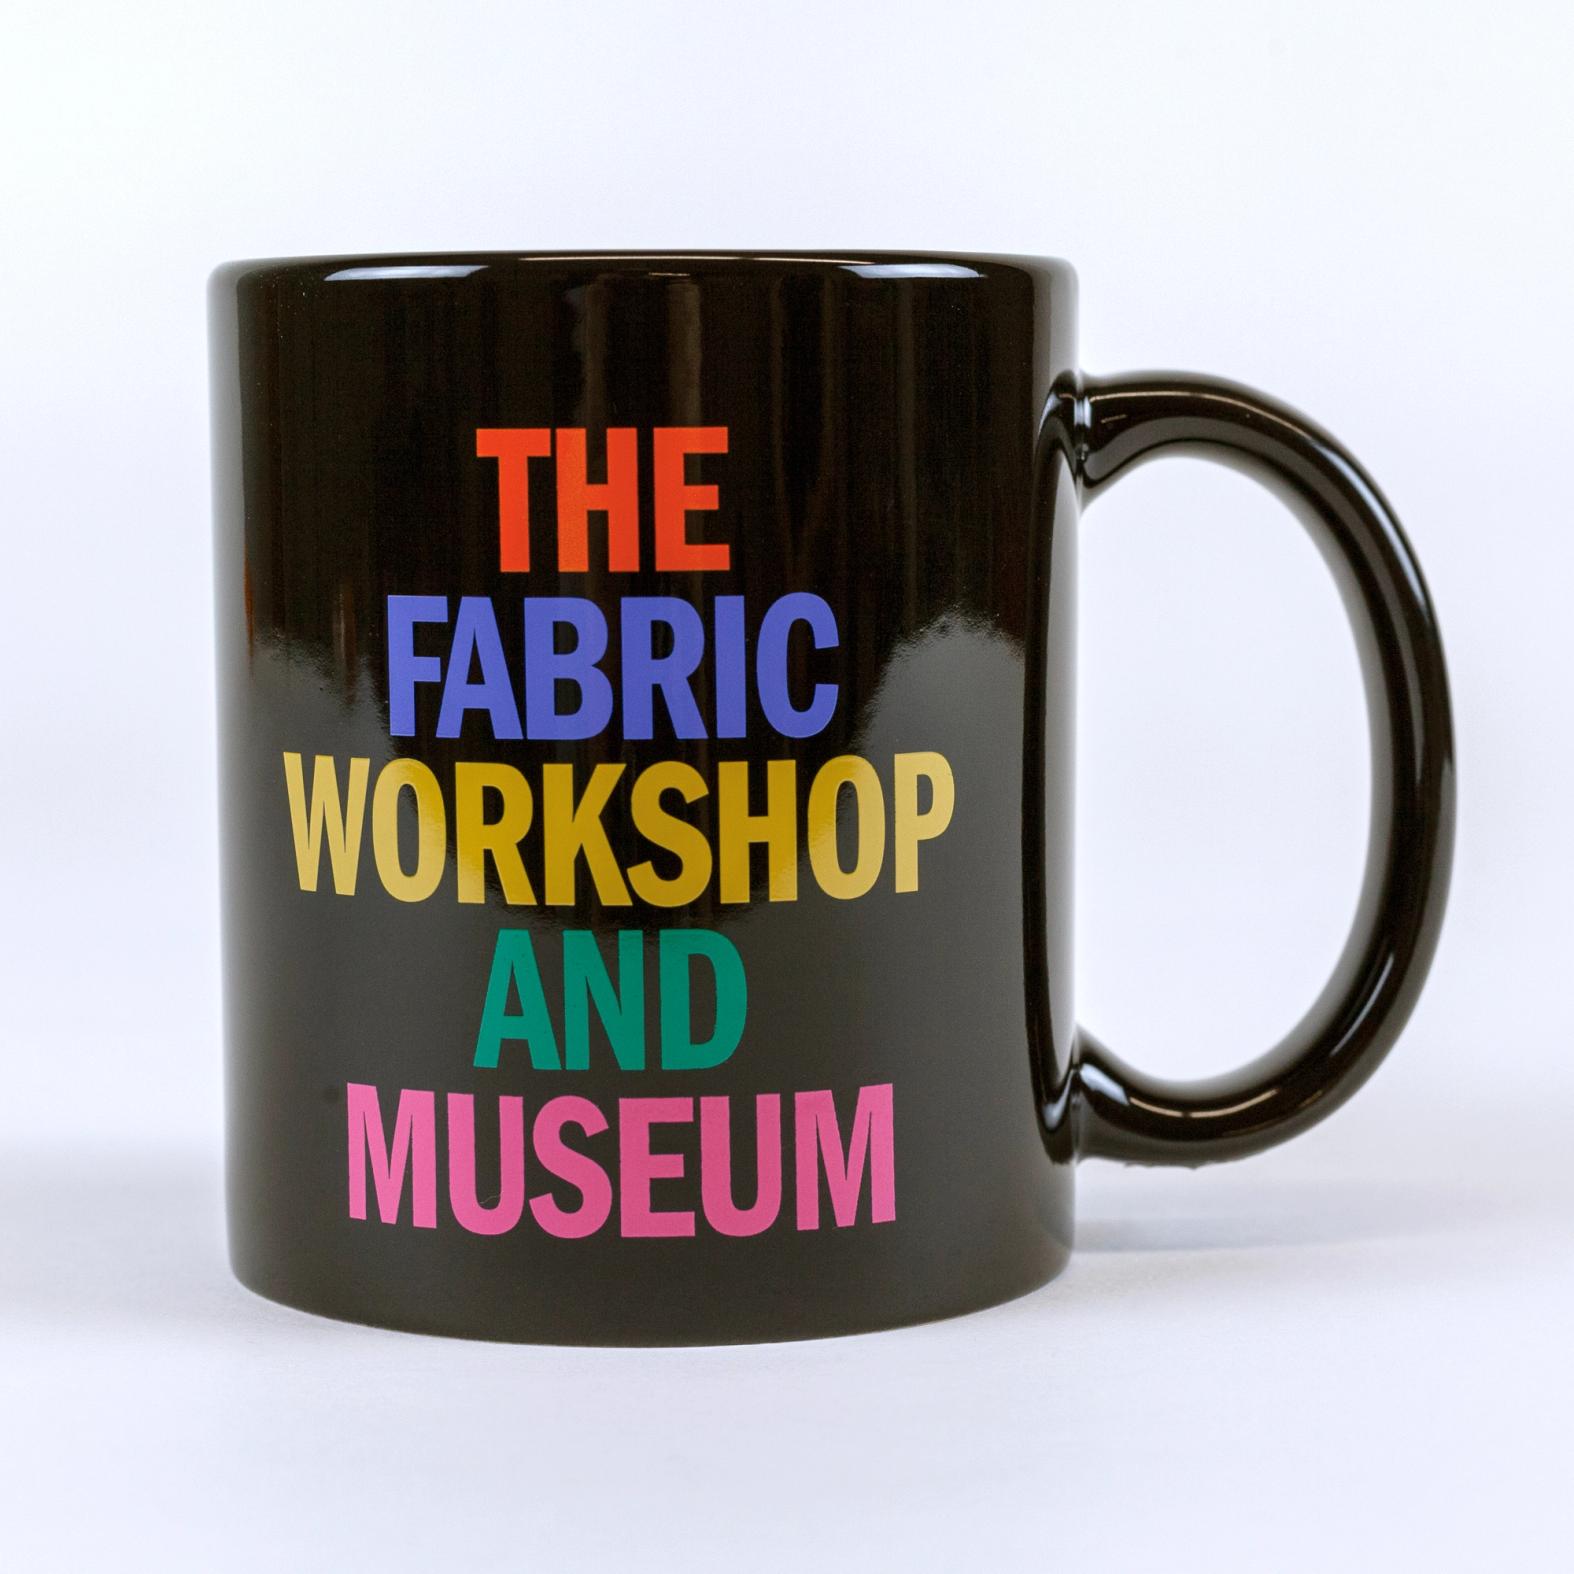 A black colored mug against a white background that reads "THE FABRIC WORKSHOP AND MUSEUM". Each word is stacked and in a different color: orange, blue, golden yellow, green, and pink.